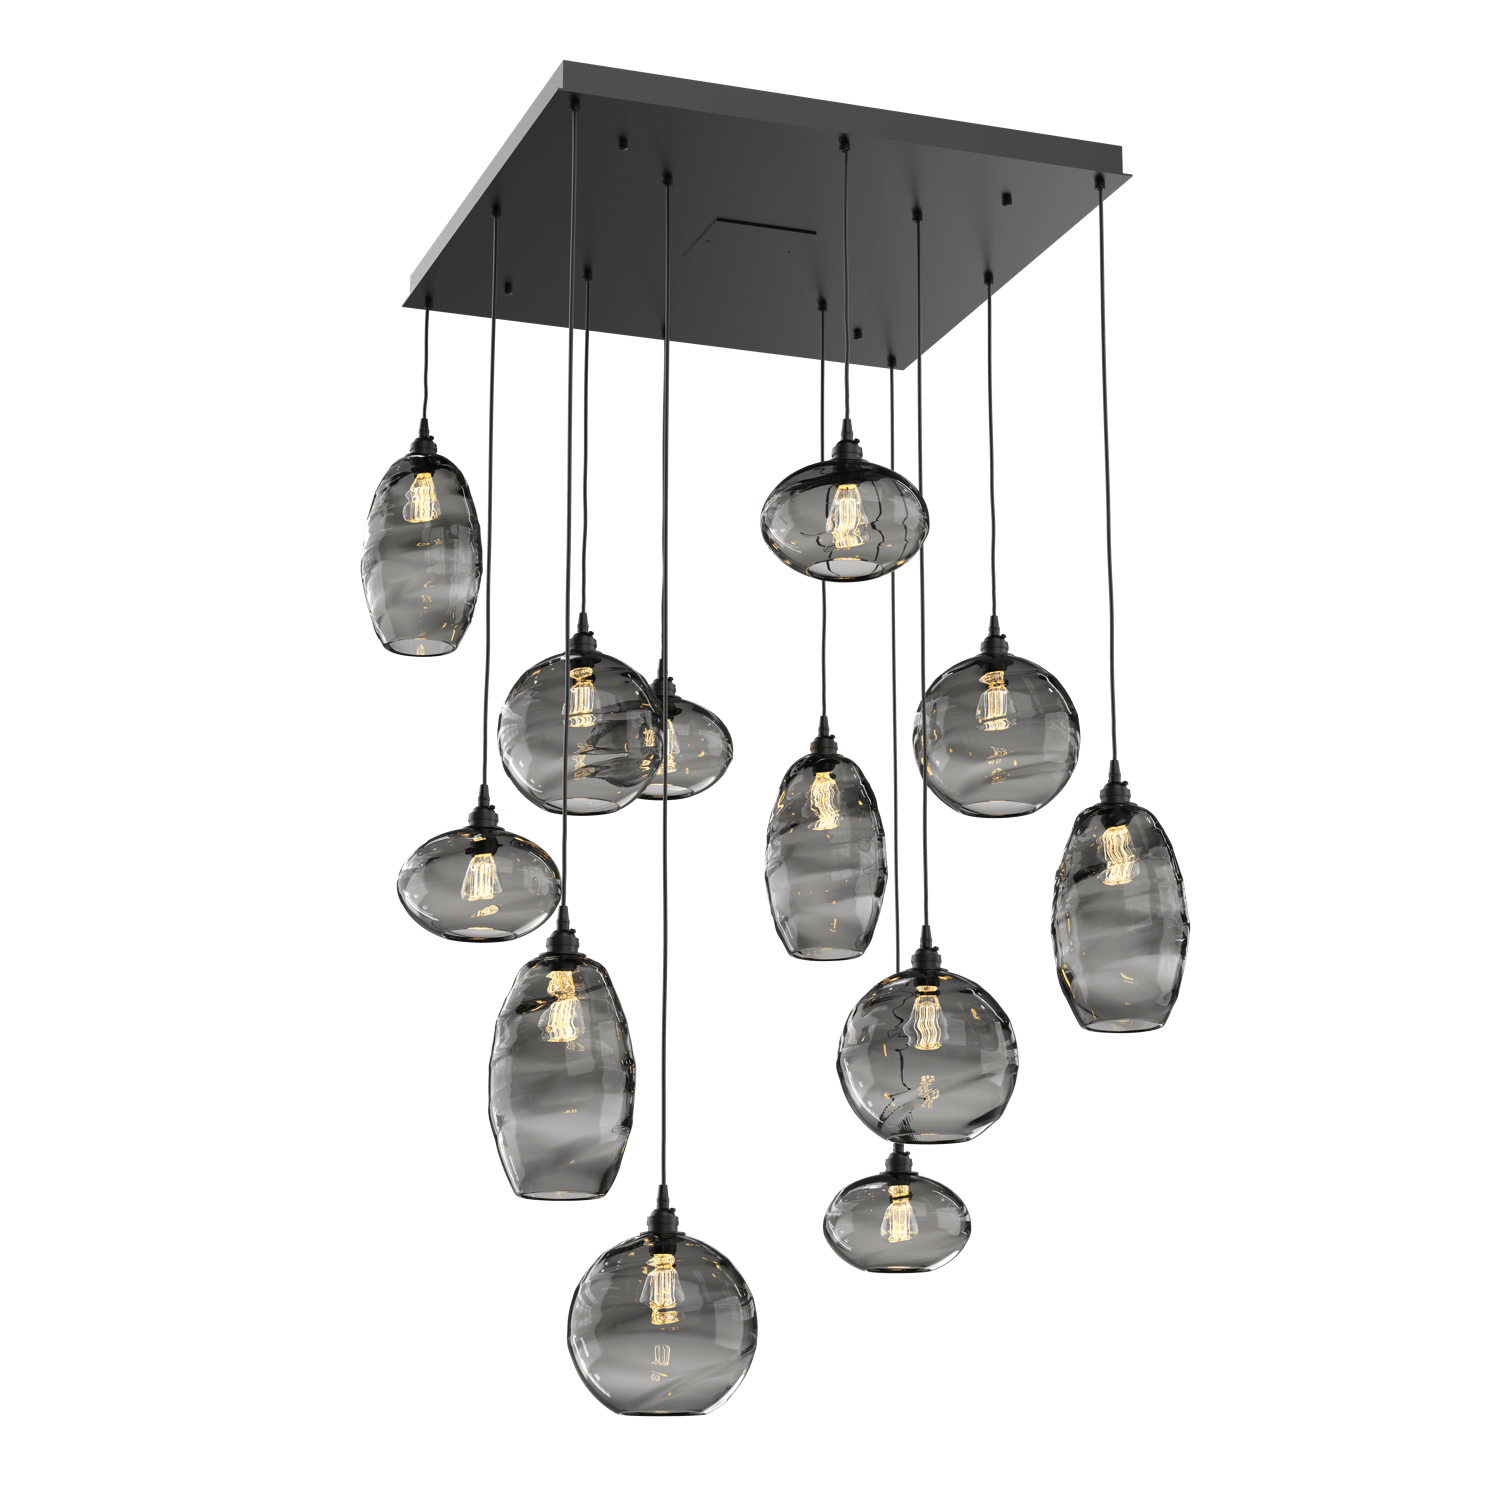 CHB0048-12-MB-OS-Hammerton-Studio-Optic-Blown-Glass-Misto-12-light-square-pendant-chandelier-with-matte-black-finish-and-optic-smoke-blown-glass-shades-and-incandescent-lamping